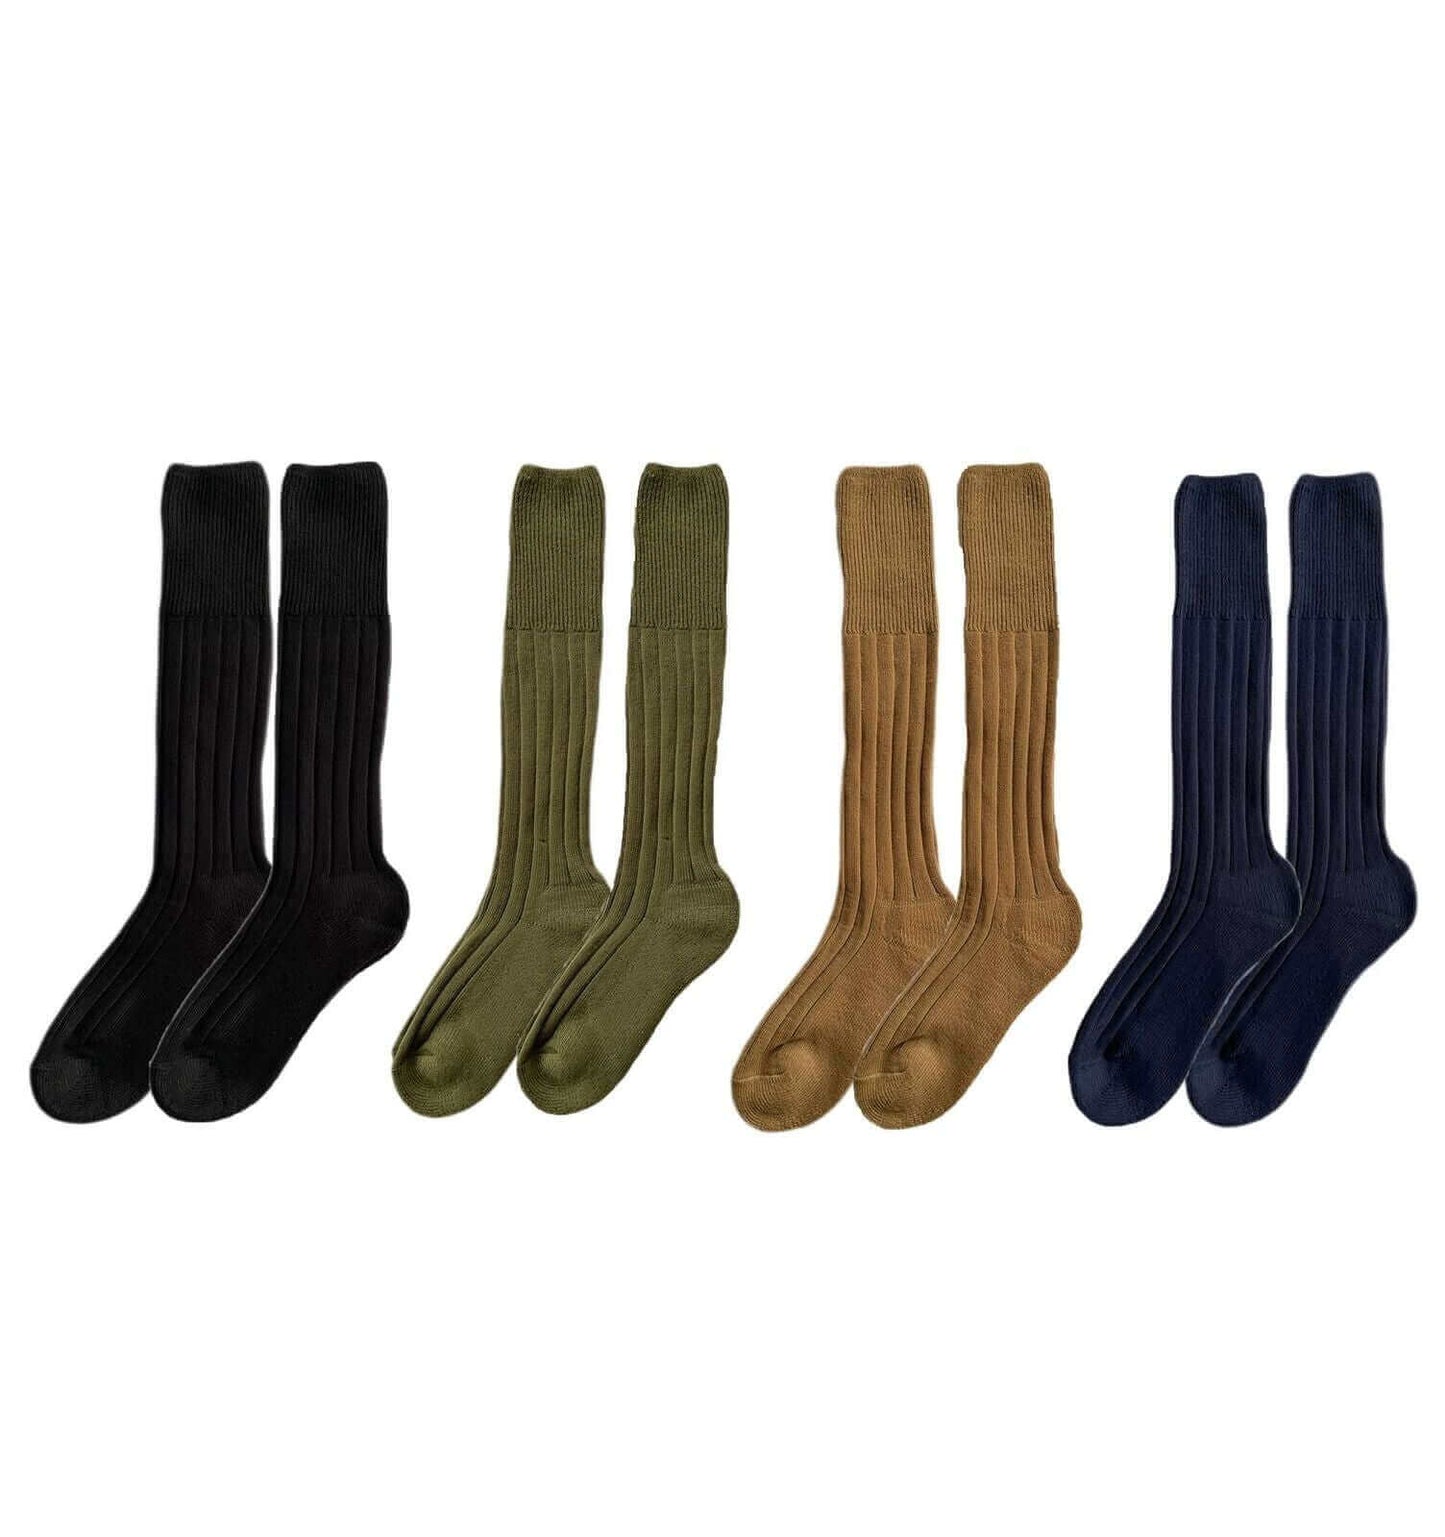 4 Pairs Of Men's Army Socks Long Knee High Military Commando Socks. Buy now for £15.00. A Socks by Sock Stack. 6-11, acrylic, army, assorted, athletics, black, blush pink, boot, boot socks, boys socks, breathable, brown, camping, comfortable, commando, co